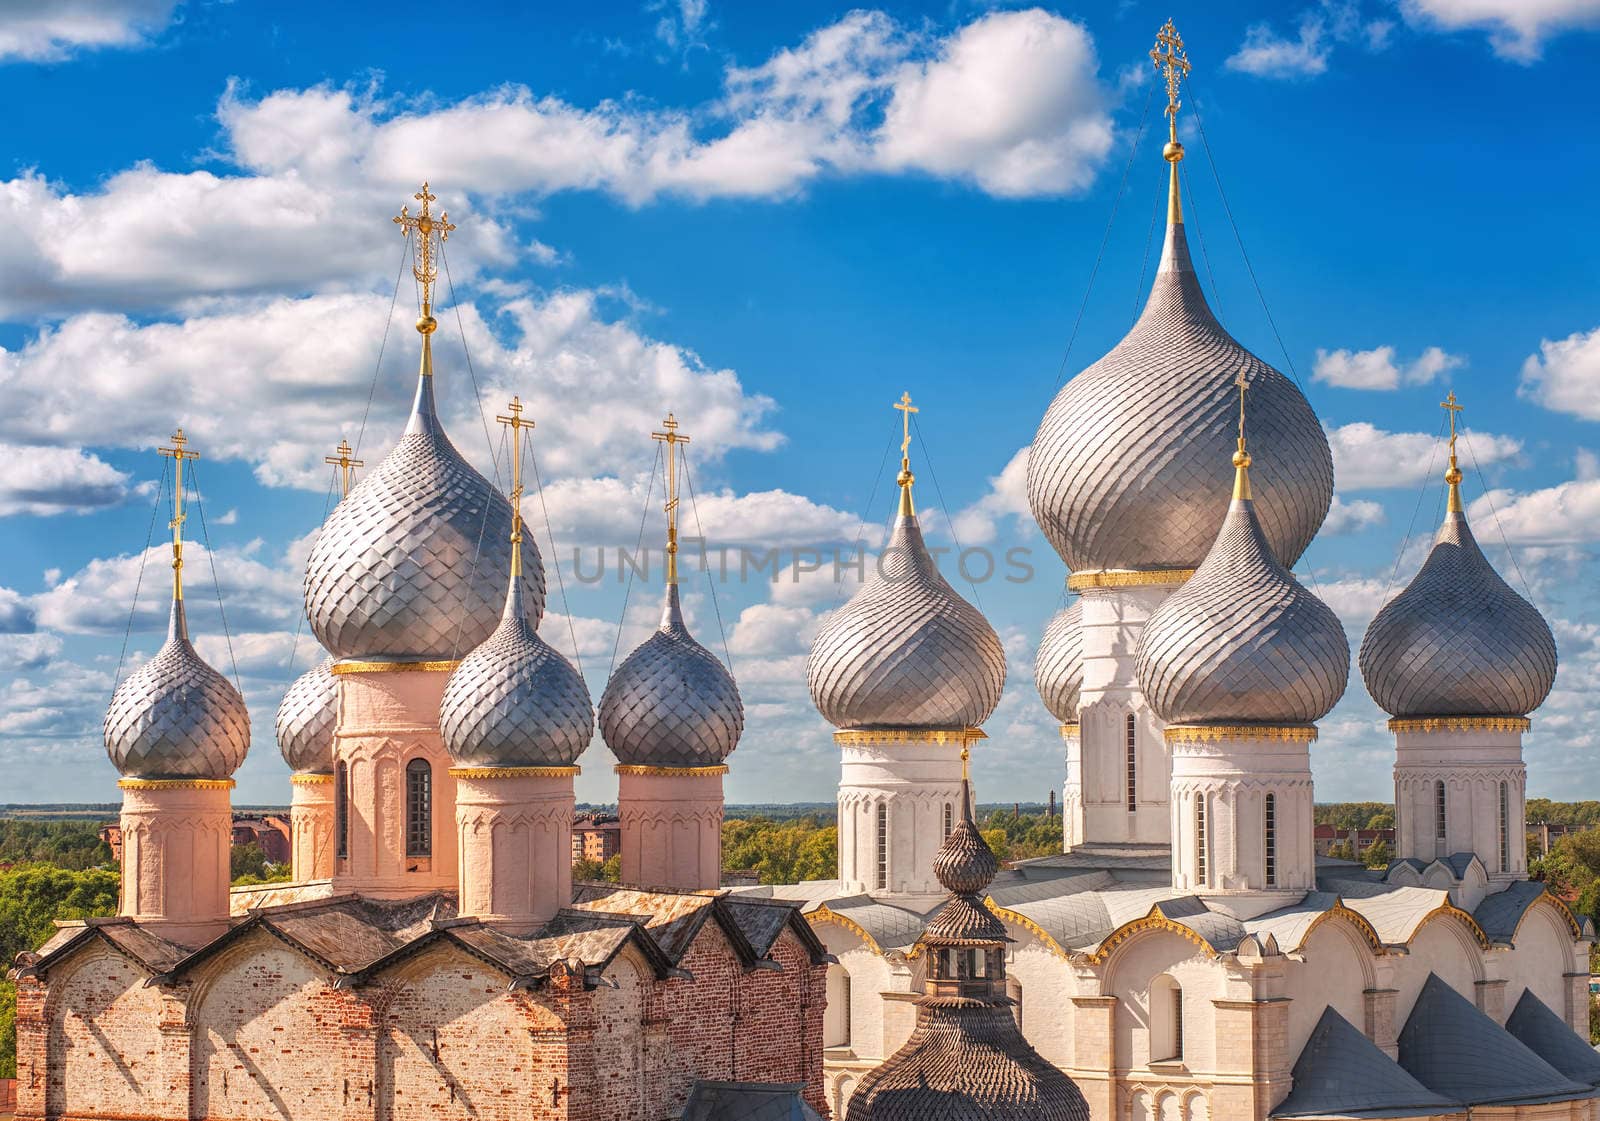 Russian orthodox church domes by GlobePhotos